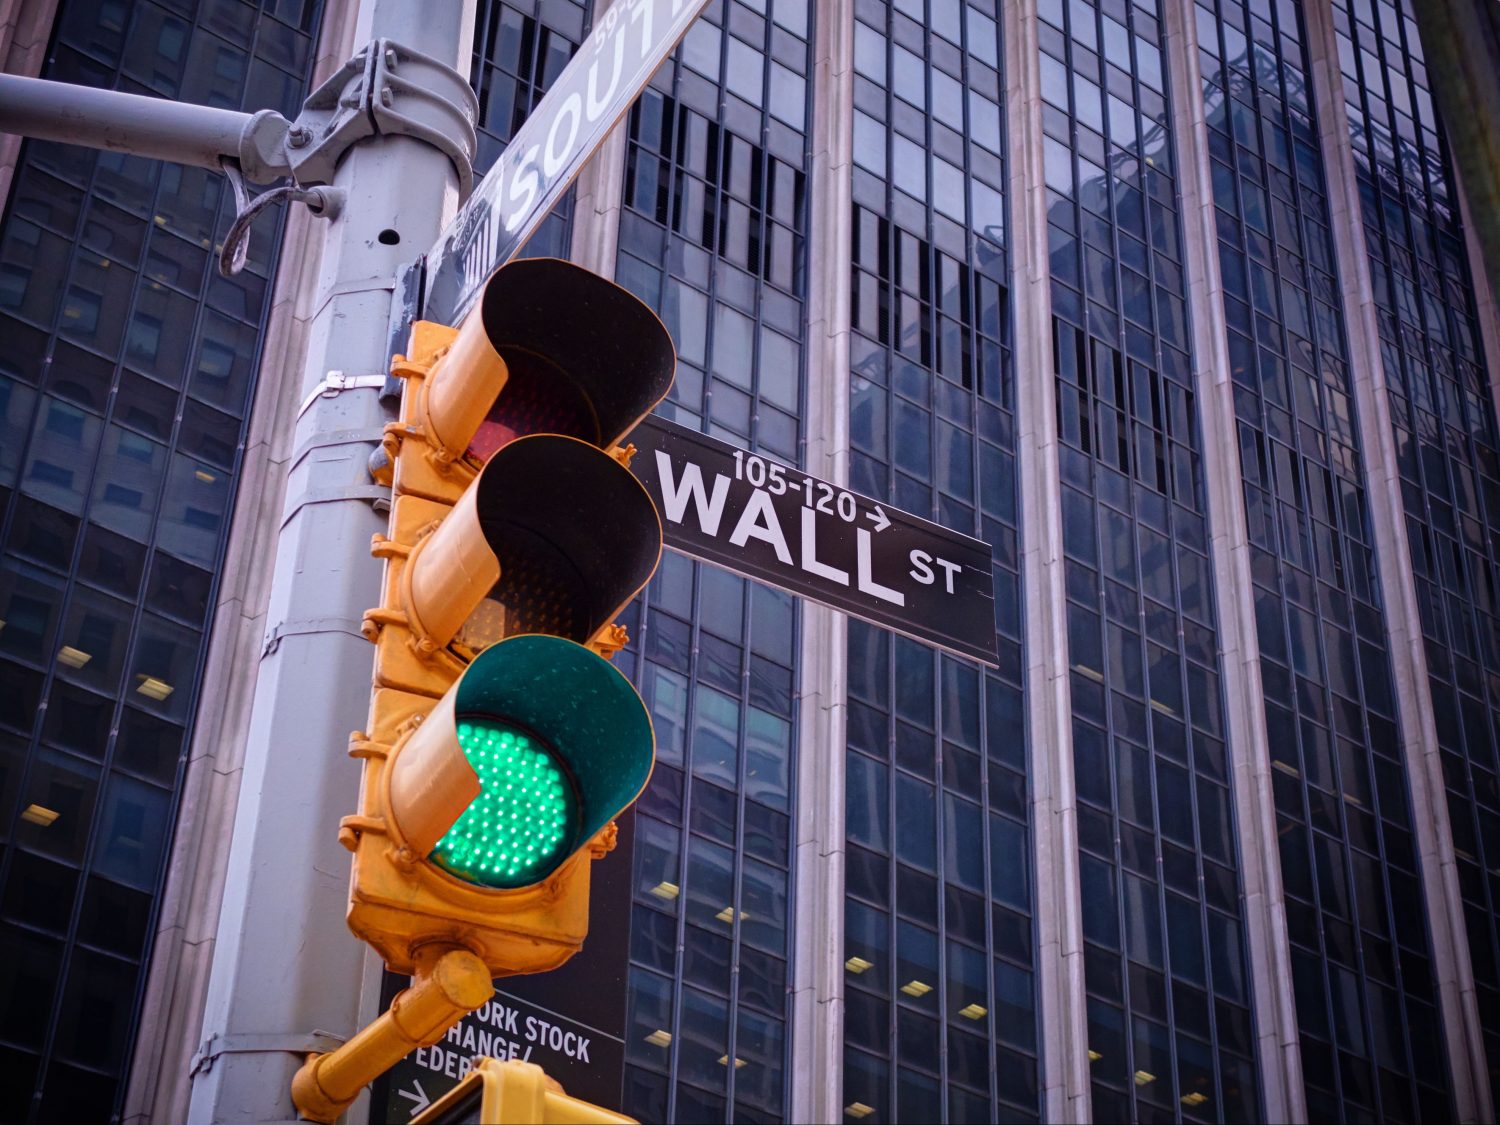 Fidelity-Backed Fireblocks In Talks With Potential Wall Street Clients Following EY Accreditation